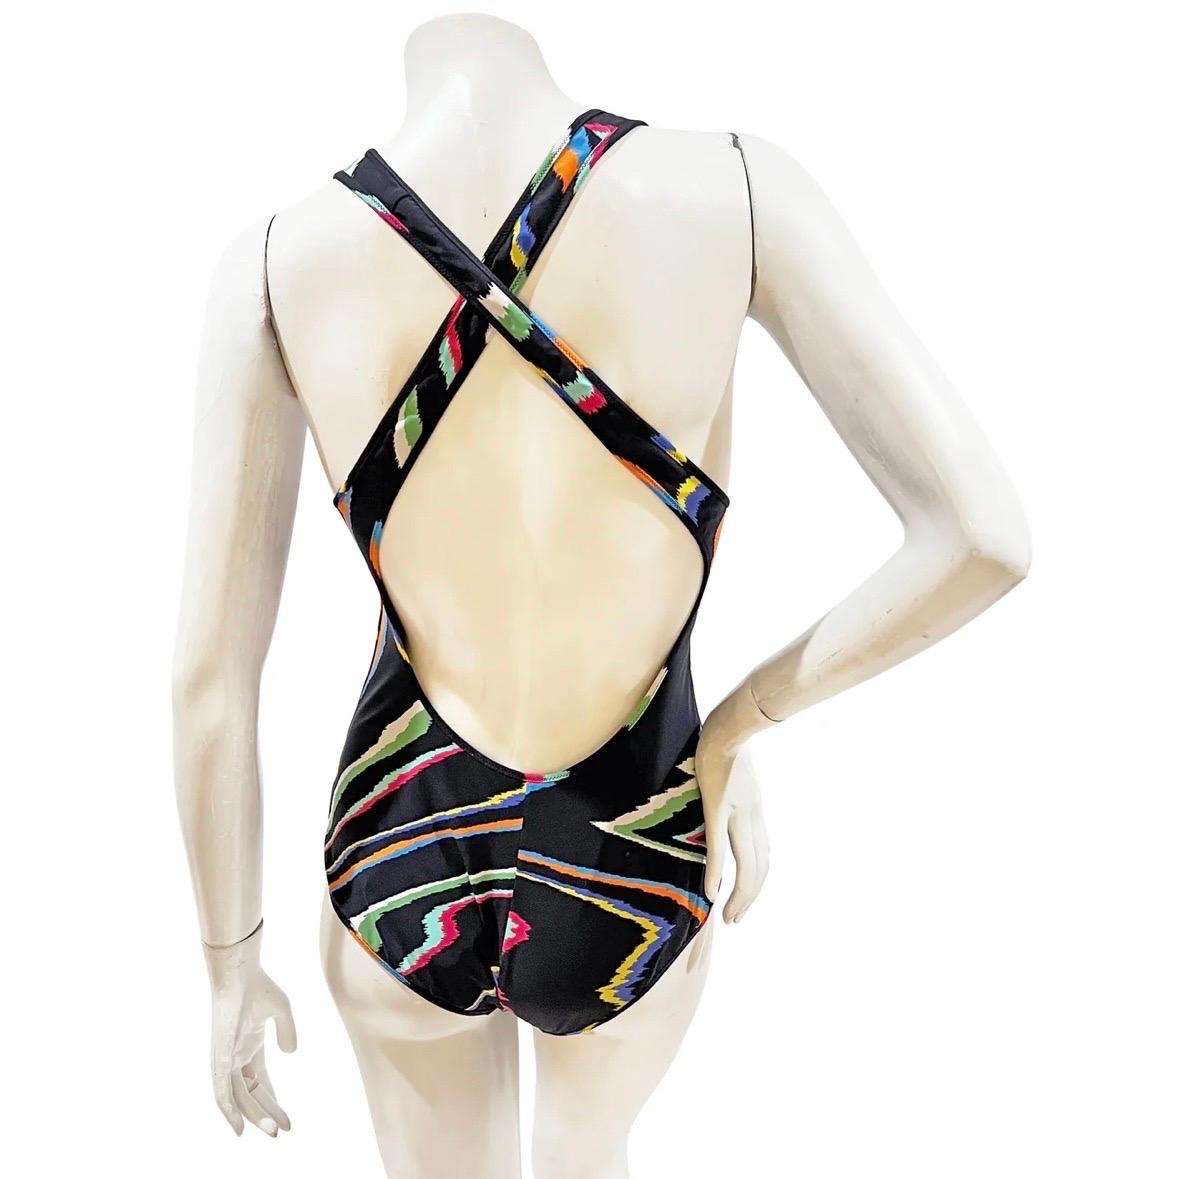 One piece vintage swimsuit by Missoni Mare
Made in Italy
Black with vertical multicolor squiggle graphic 
Criss-cross back straps  
Fabric Composition; 73% nylon, 27% elastane
Excellent condition; New with tags. 
Size/Measurements: (approximate,